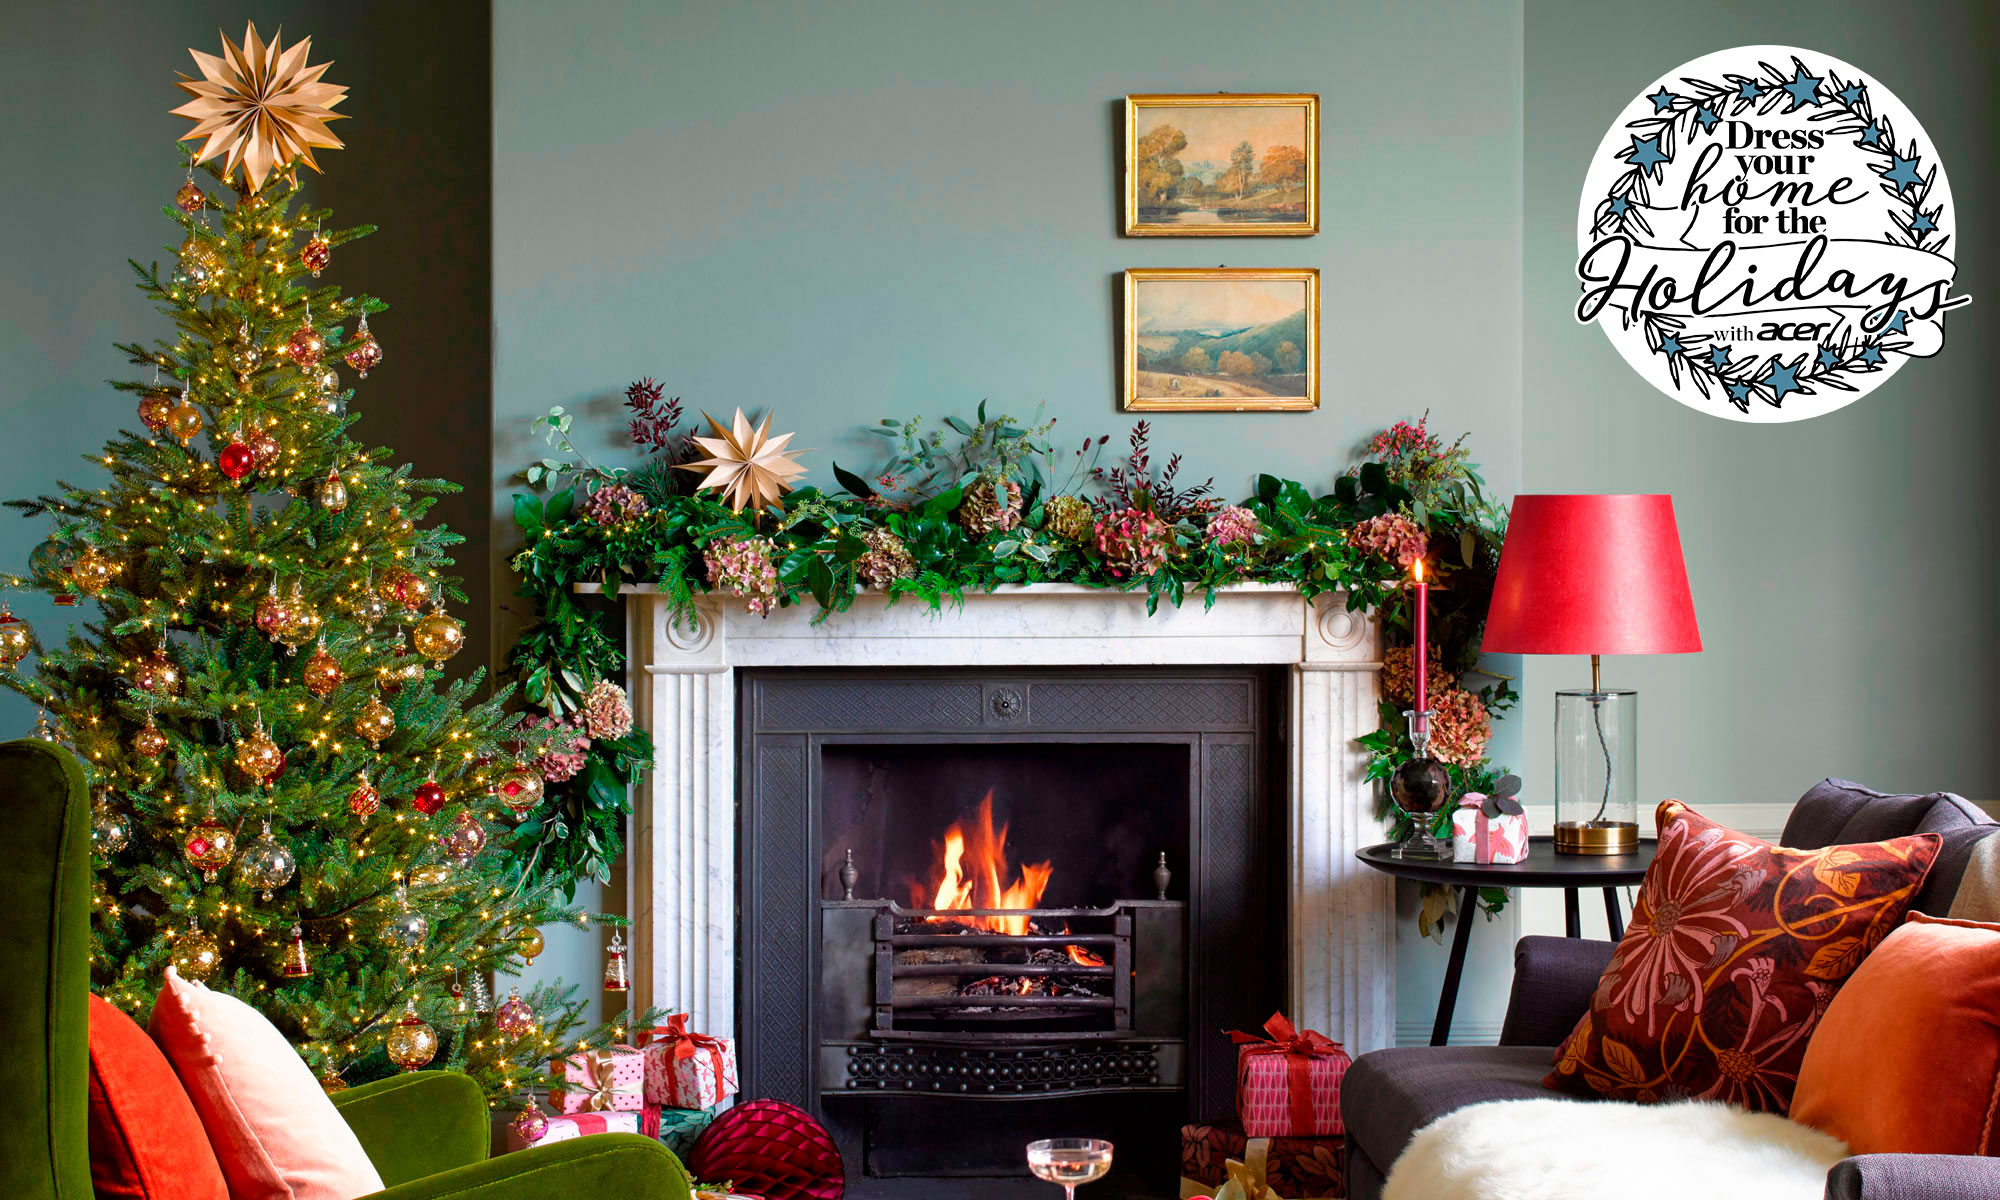 5 Easy Ways To Make A Minimalist Home Feel Festive At Christmas